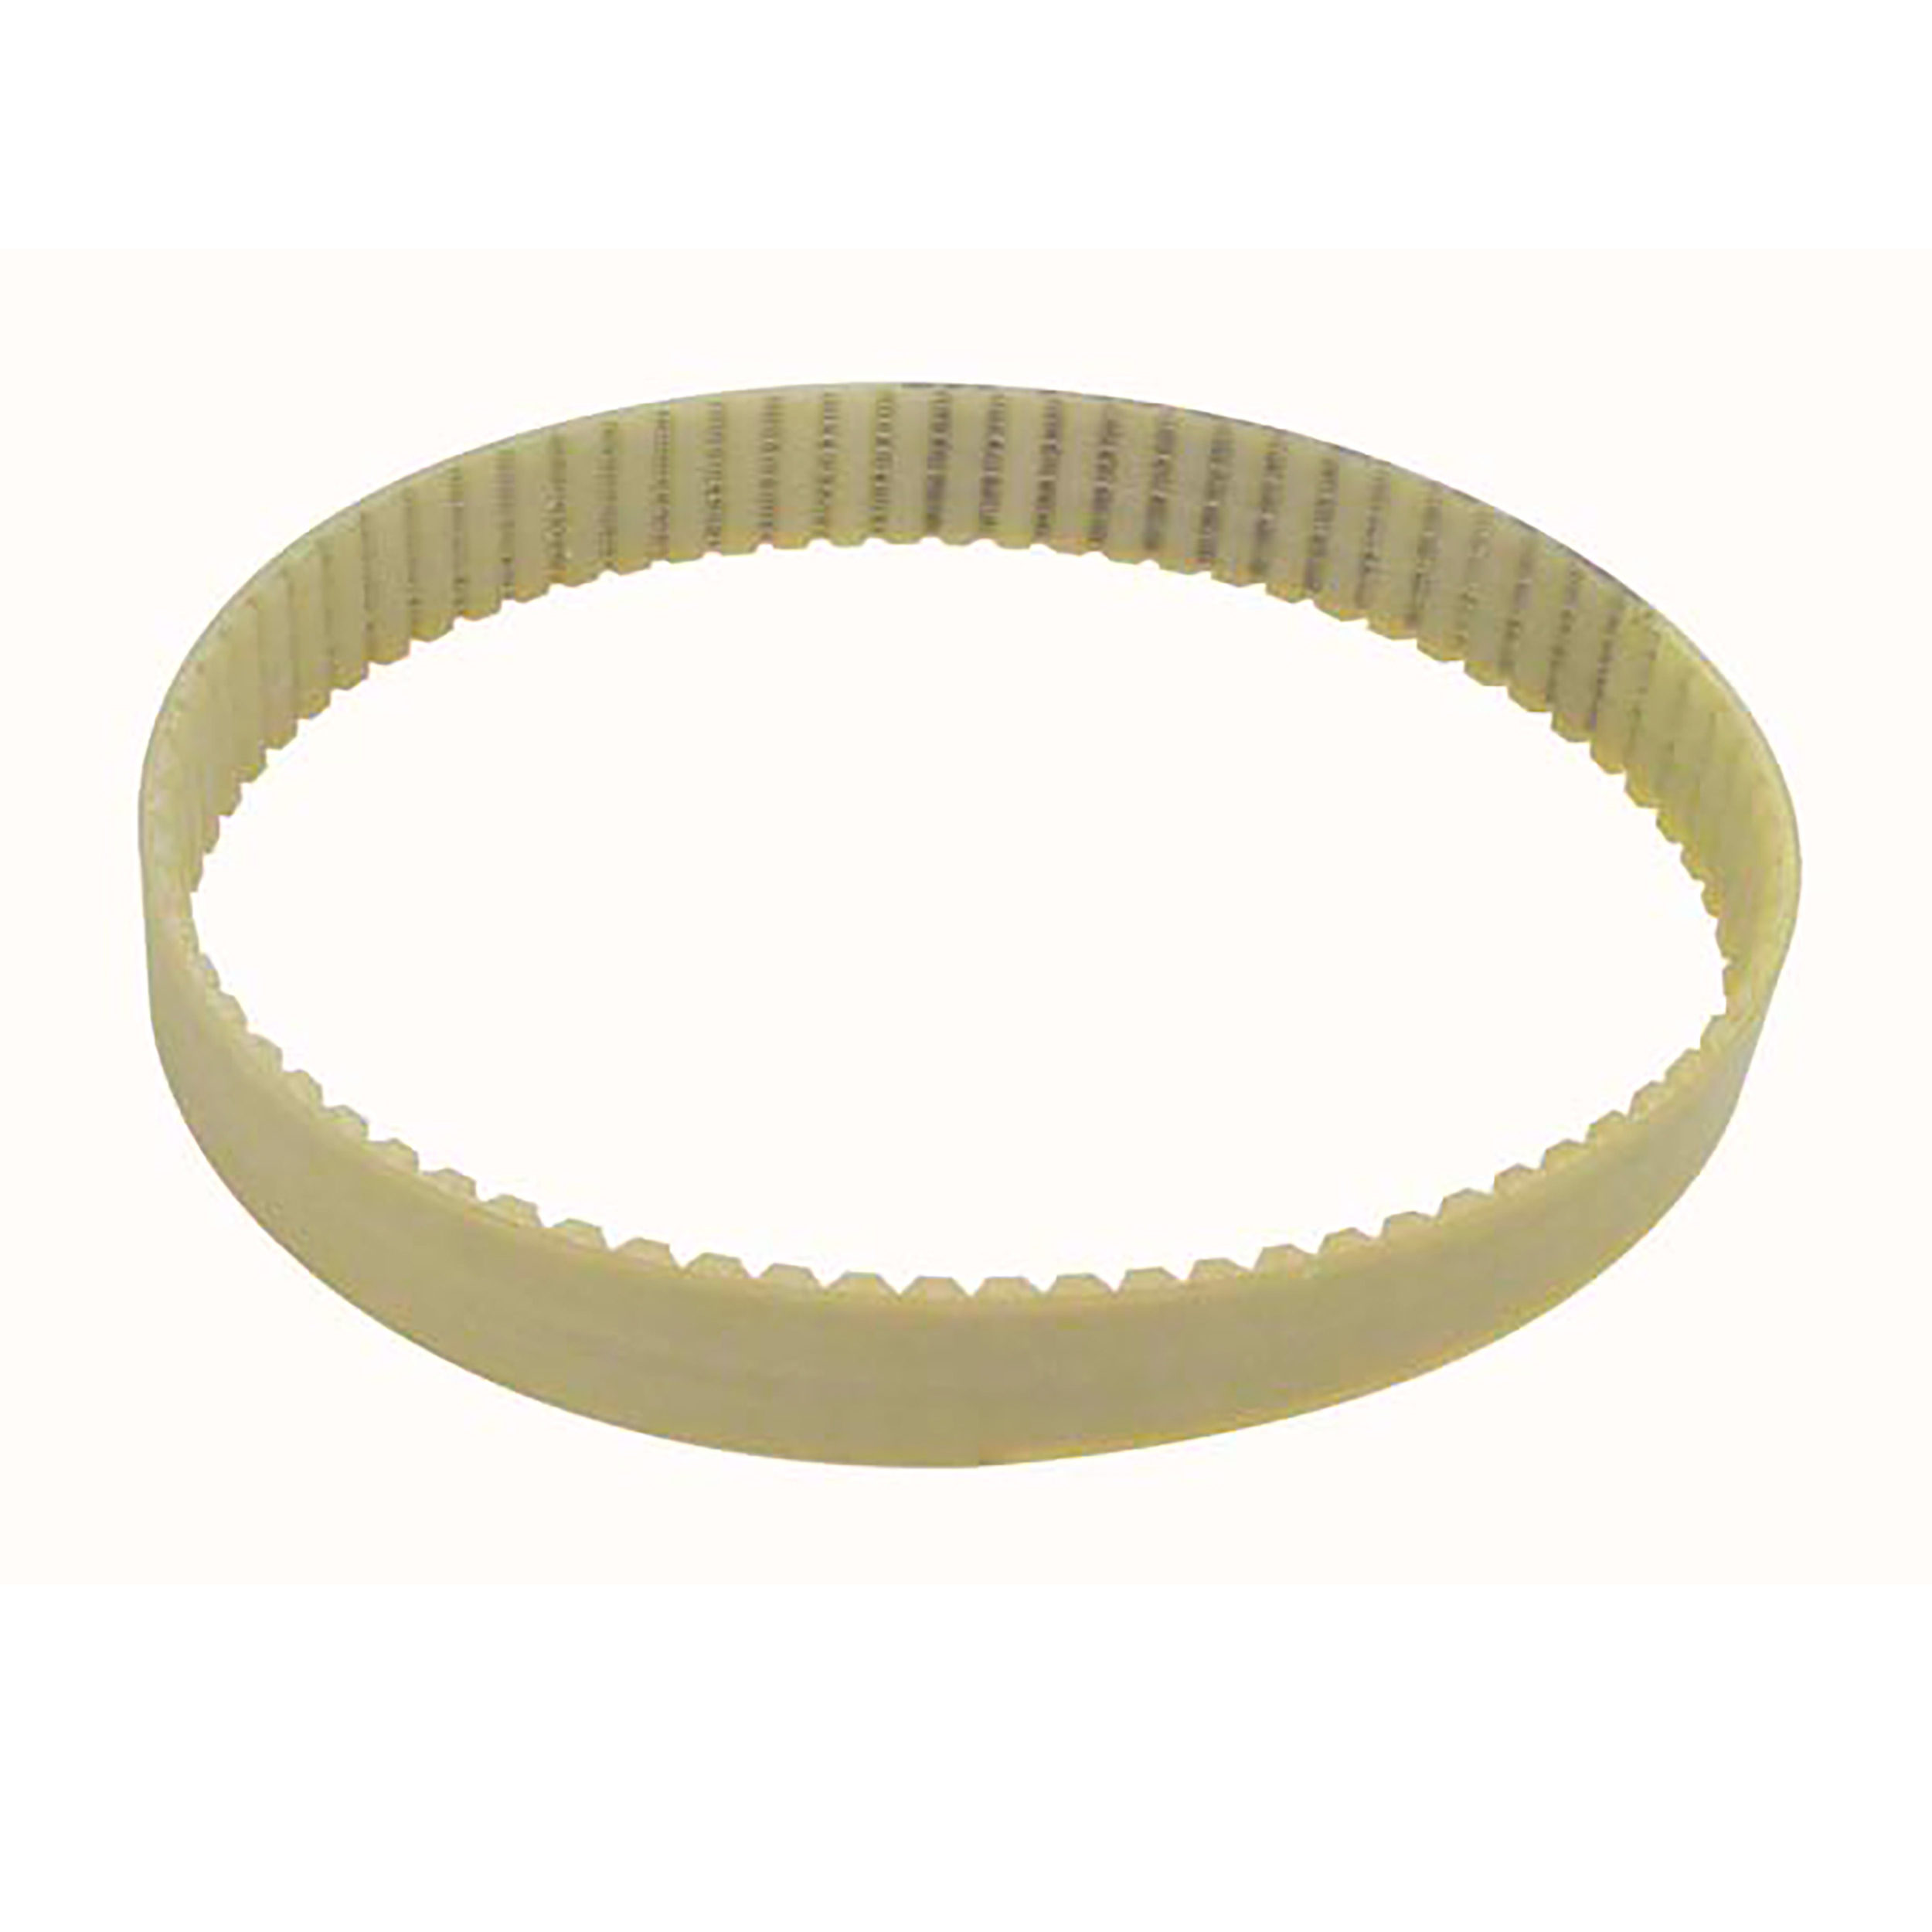 AT type timing belt - AT5 Steel cored polyurethane - 10mm - AT